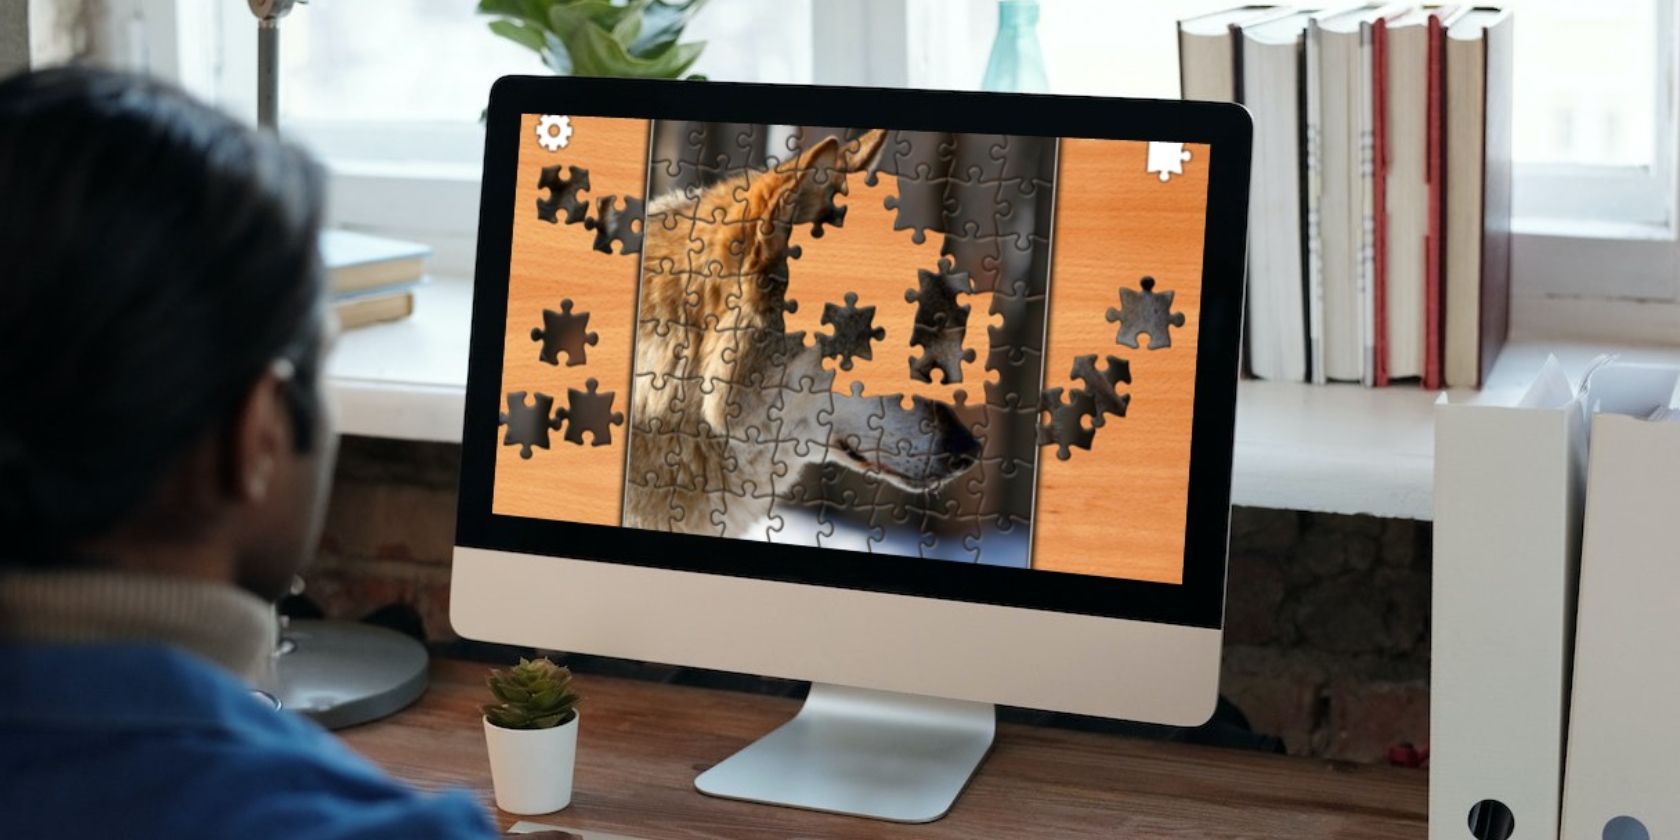 download free puzzle games for mac os-x without app store